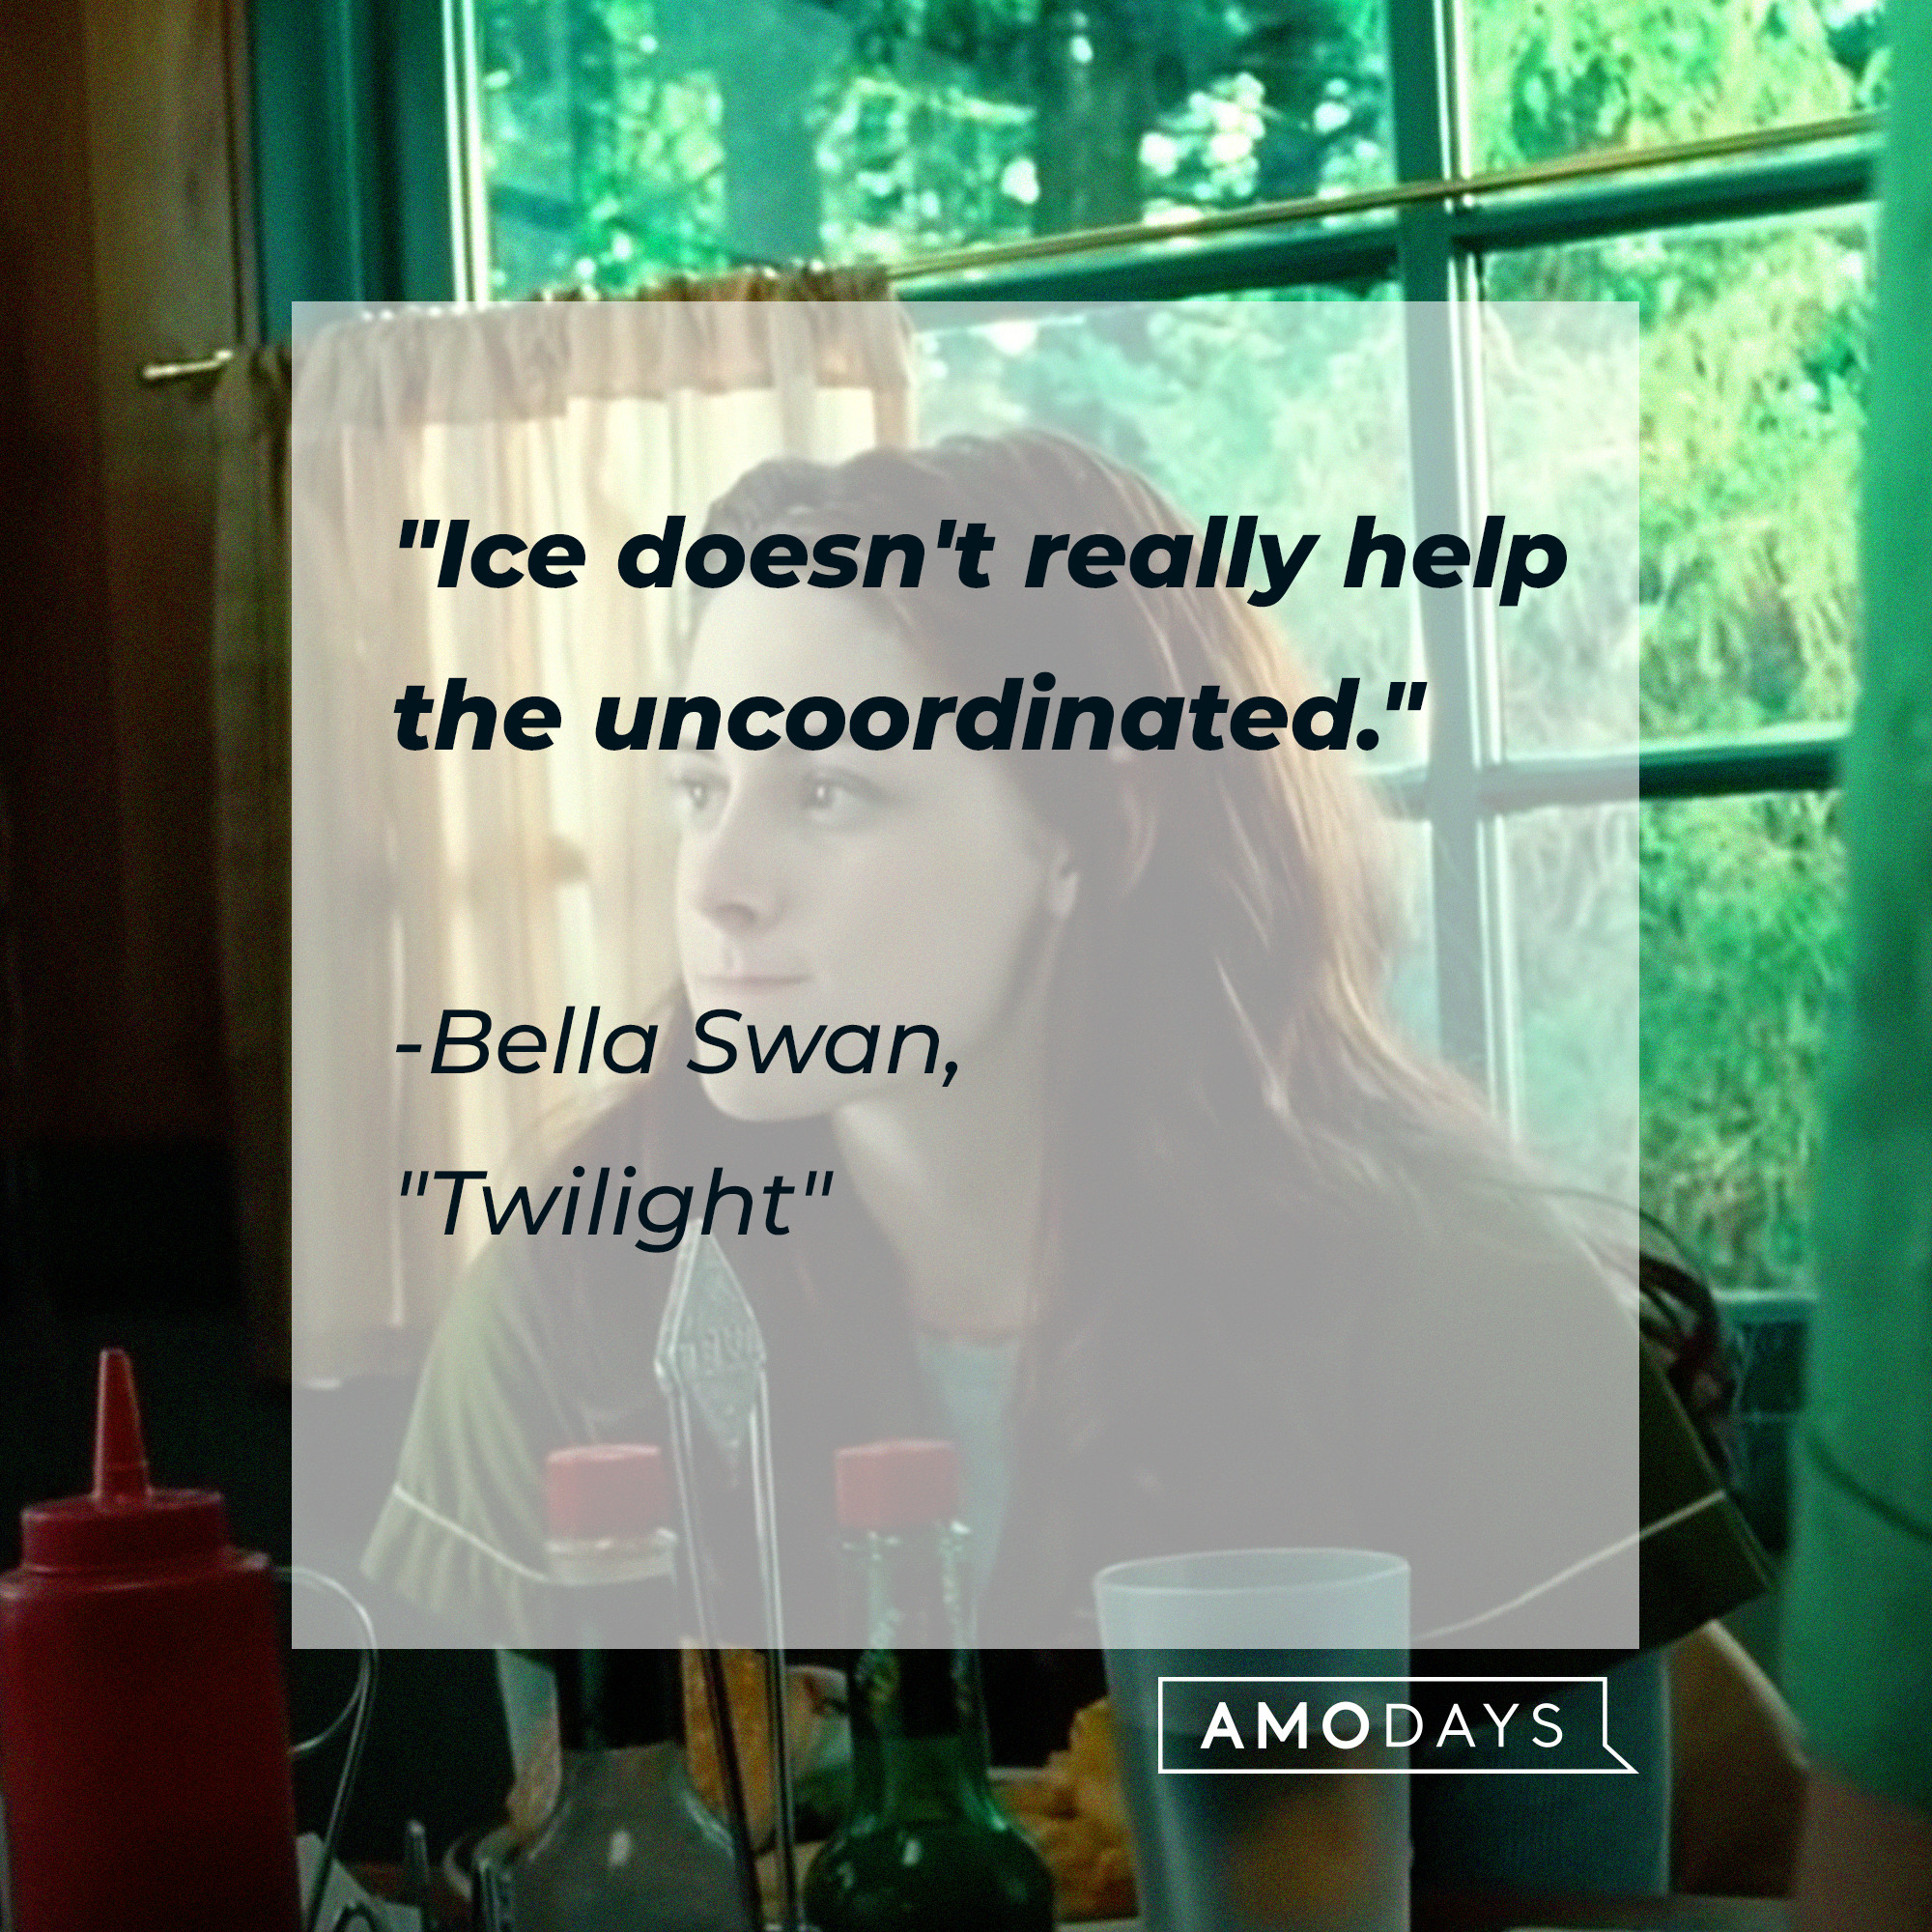 Bella Swan with her quote: "Ice doesn't really help the uncoordinated." | Source: Facebook.com/twilight